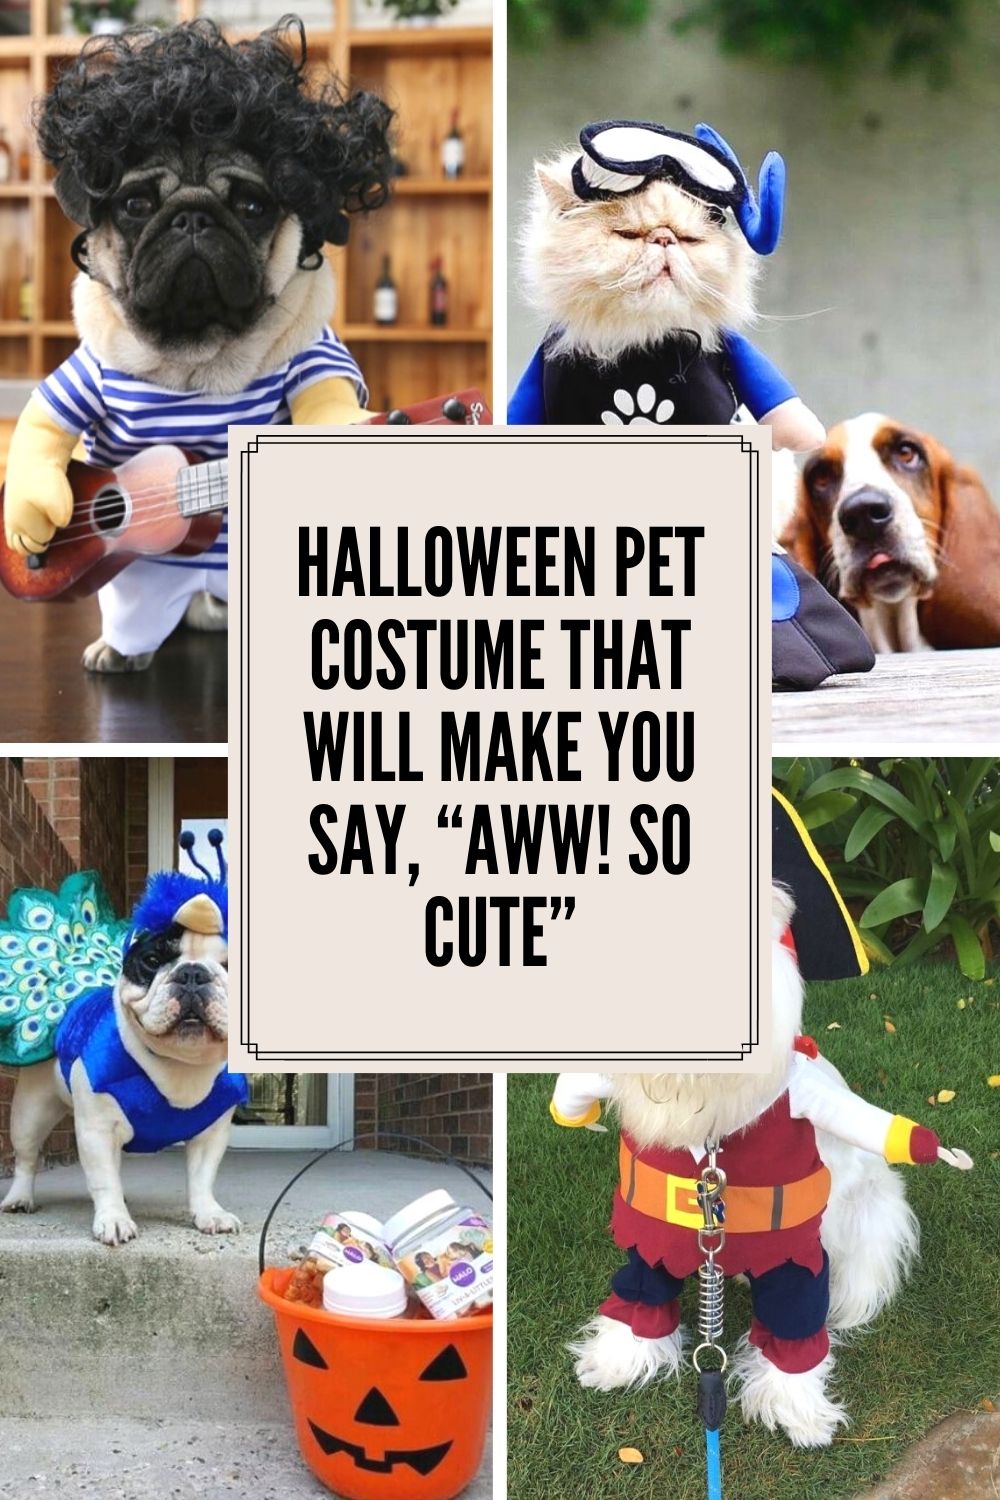 Halloween Pet Costume that will make you say, “Aww! SO Cute”